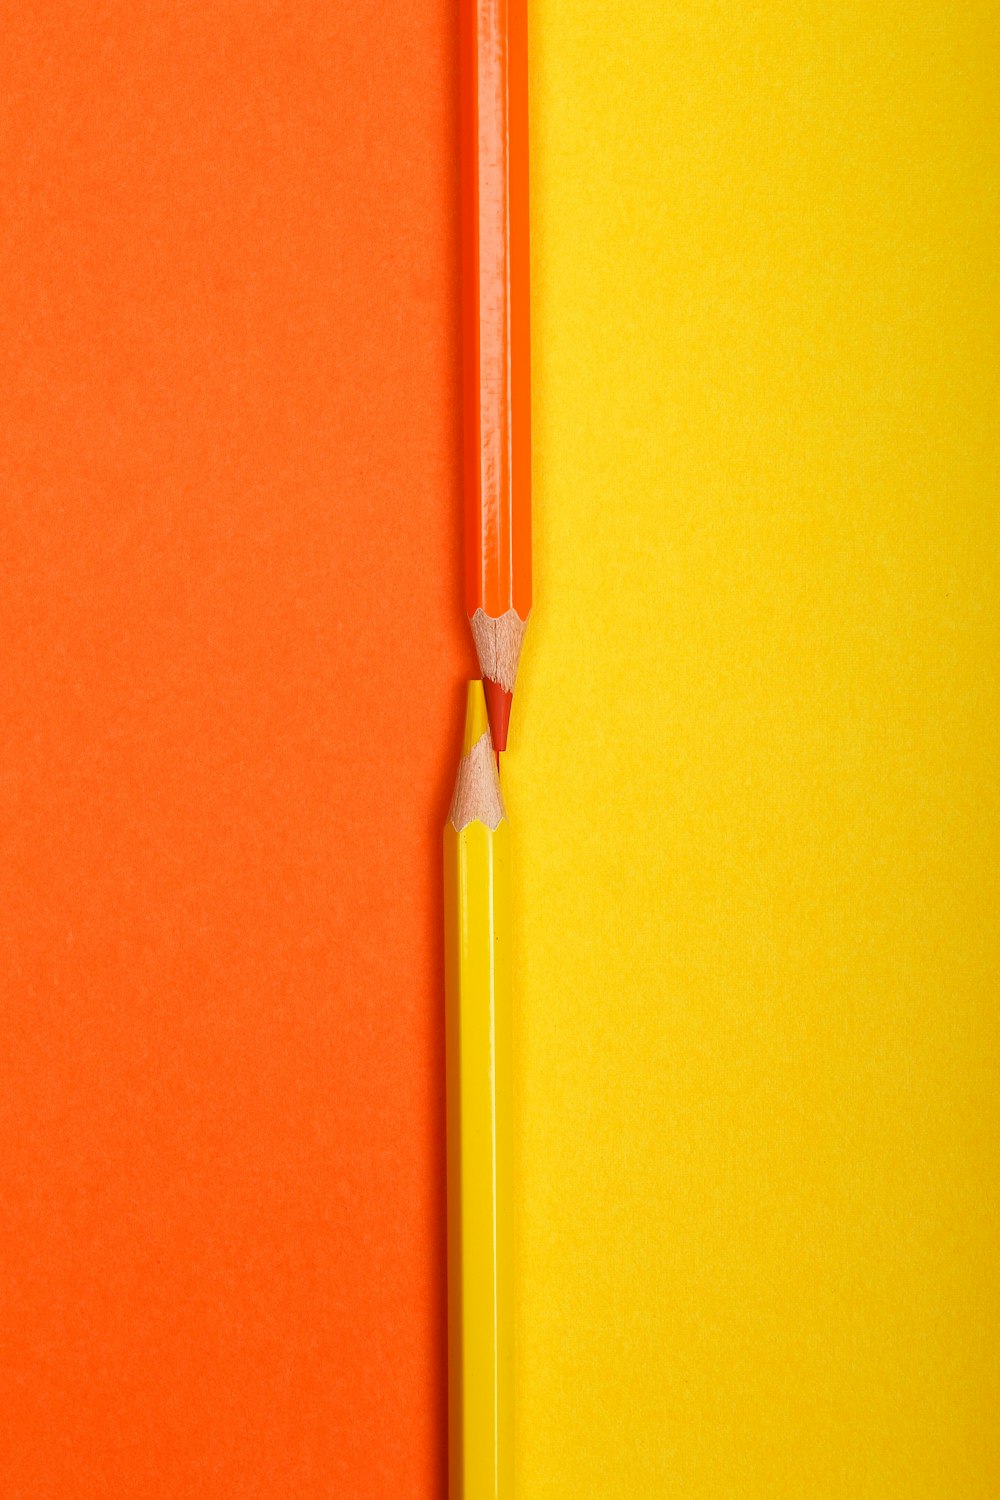 yellow pencil on yellow surface